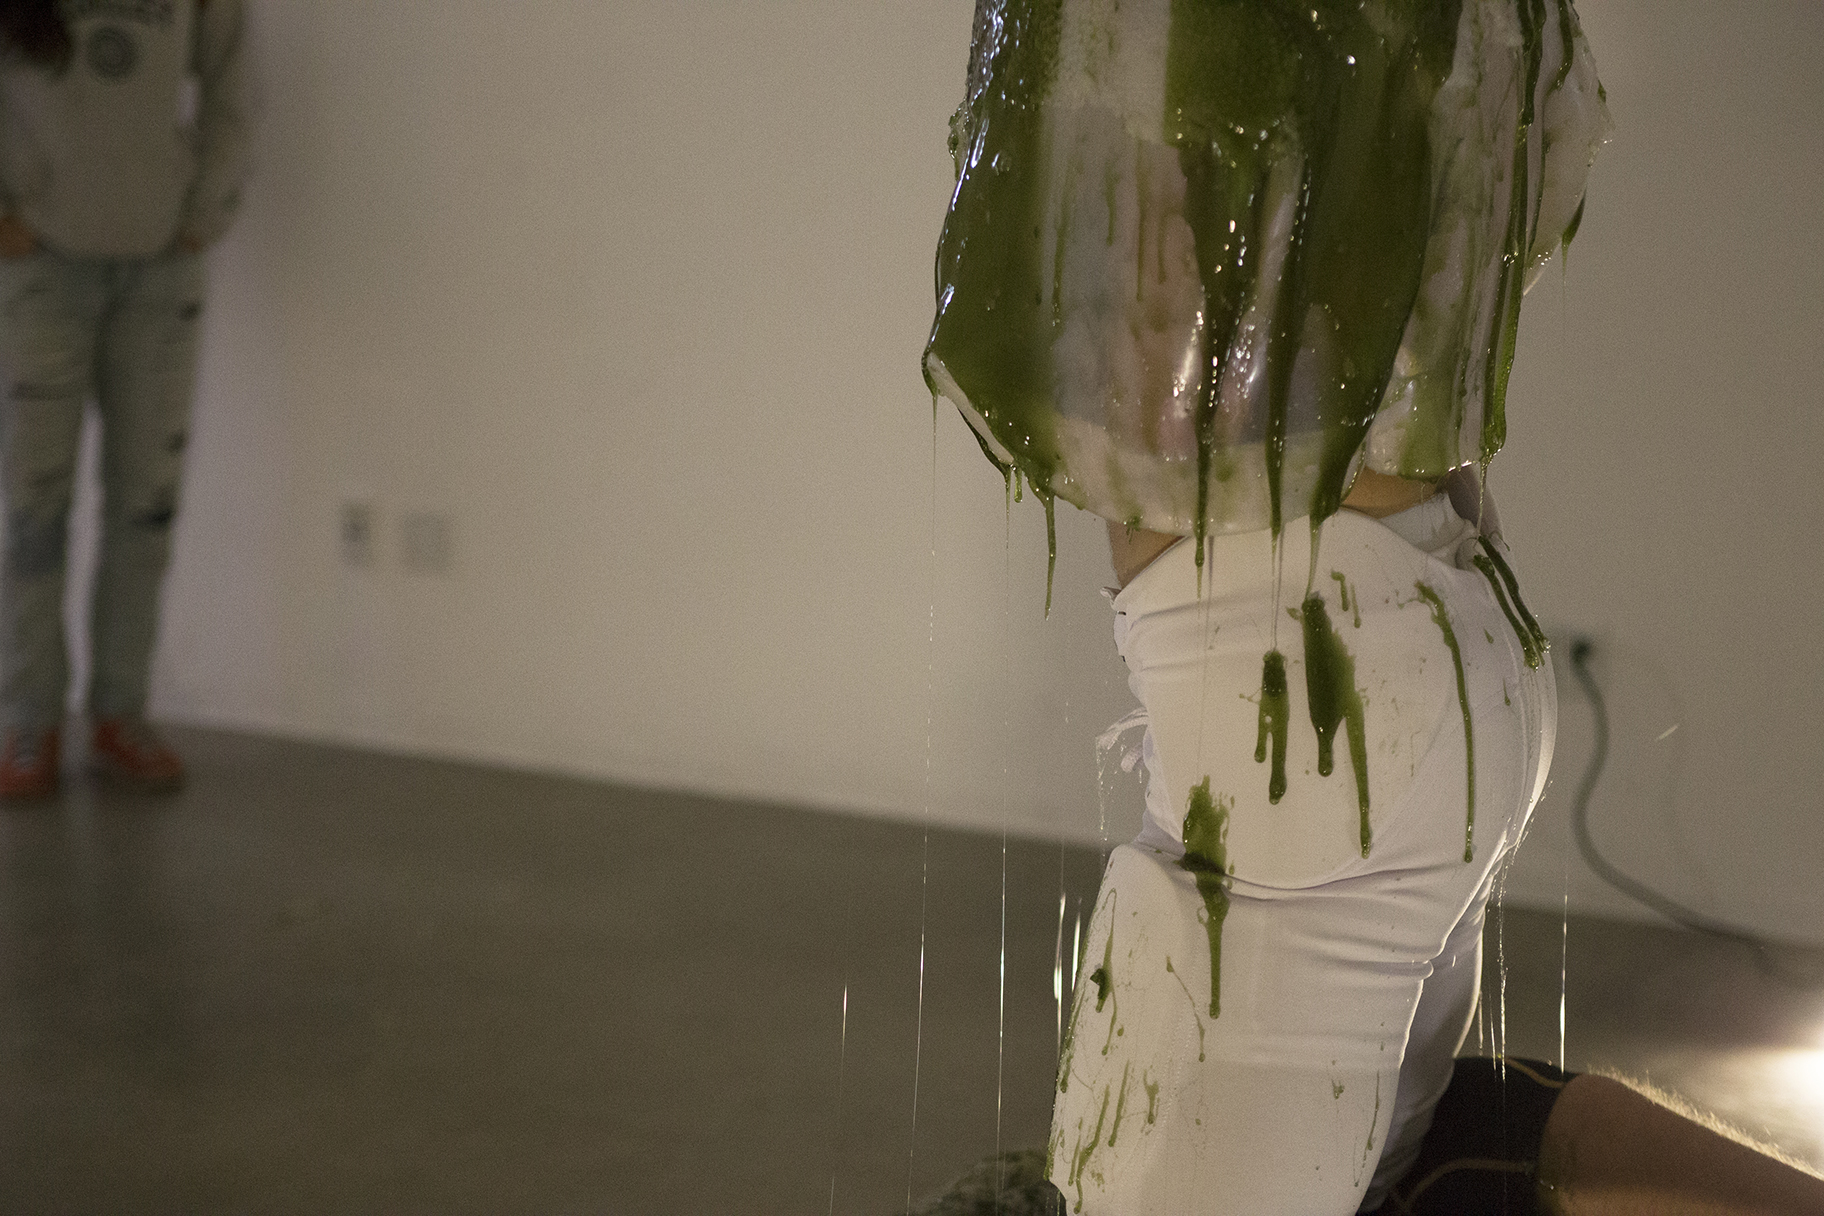 Detail of man engulfed in a gelatenous form covered in tentacles knealing over a pool of green slime in a gallery